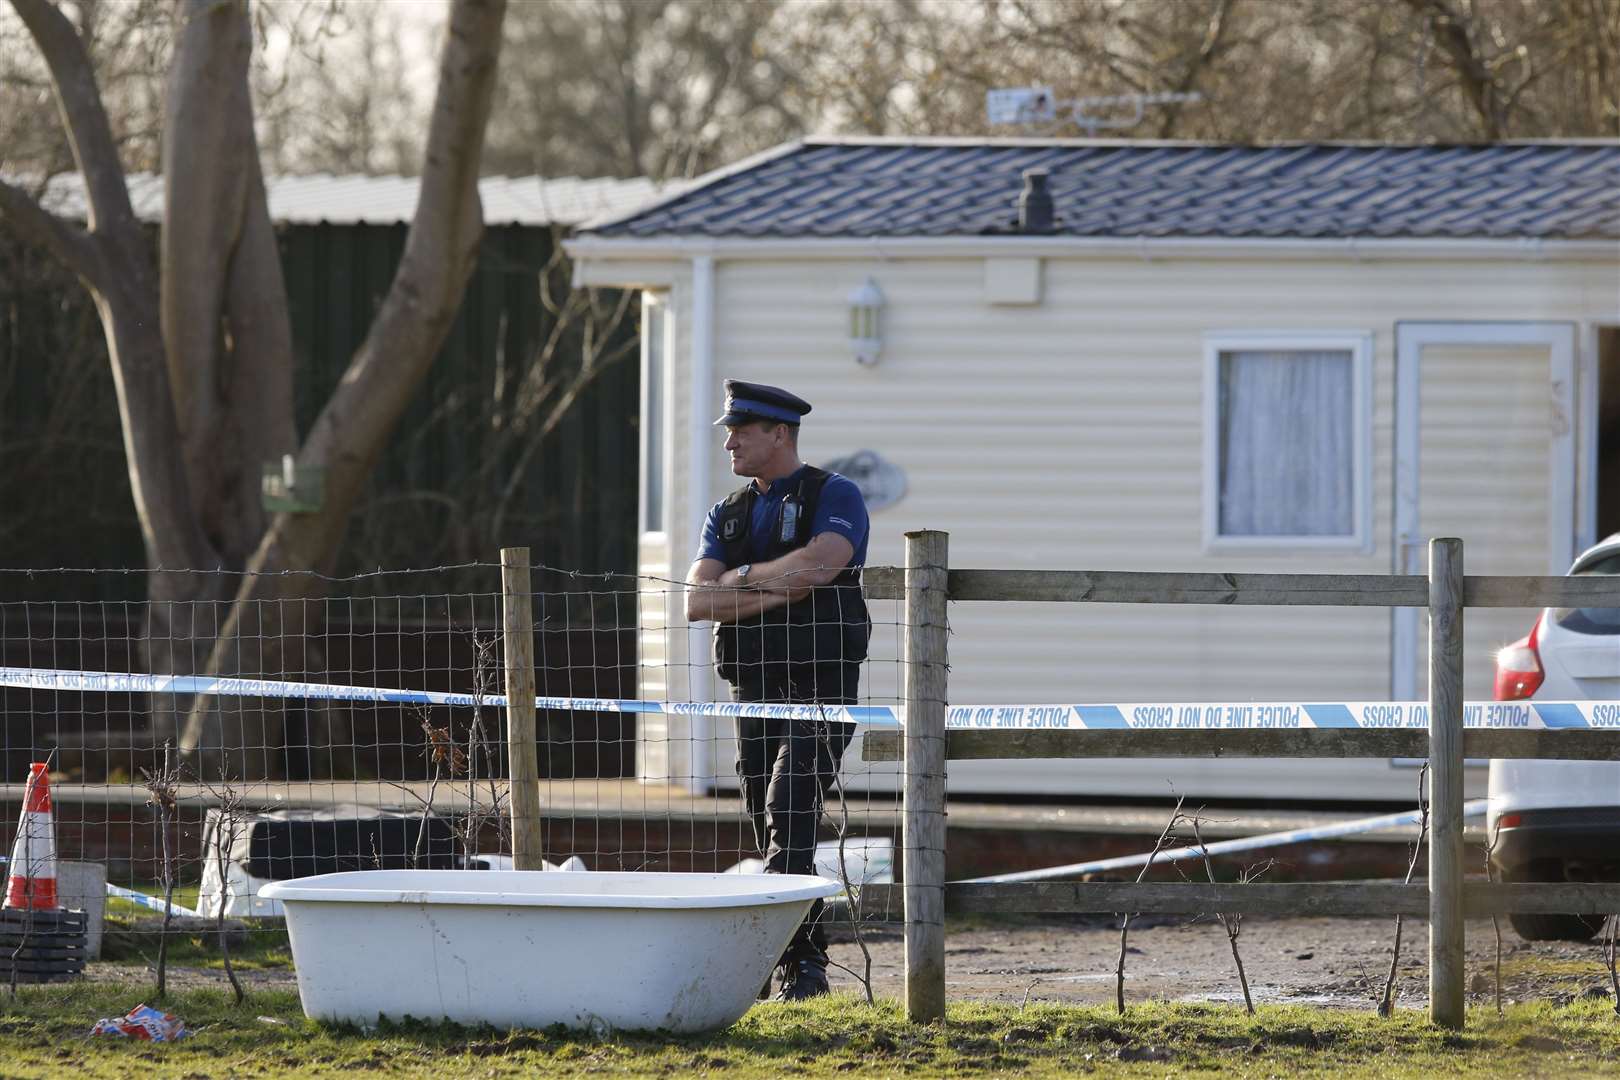 The raid is said to have occurred after threats were made Picture: Andy Jones